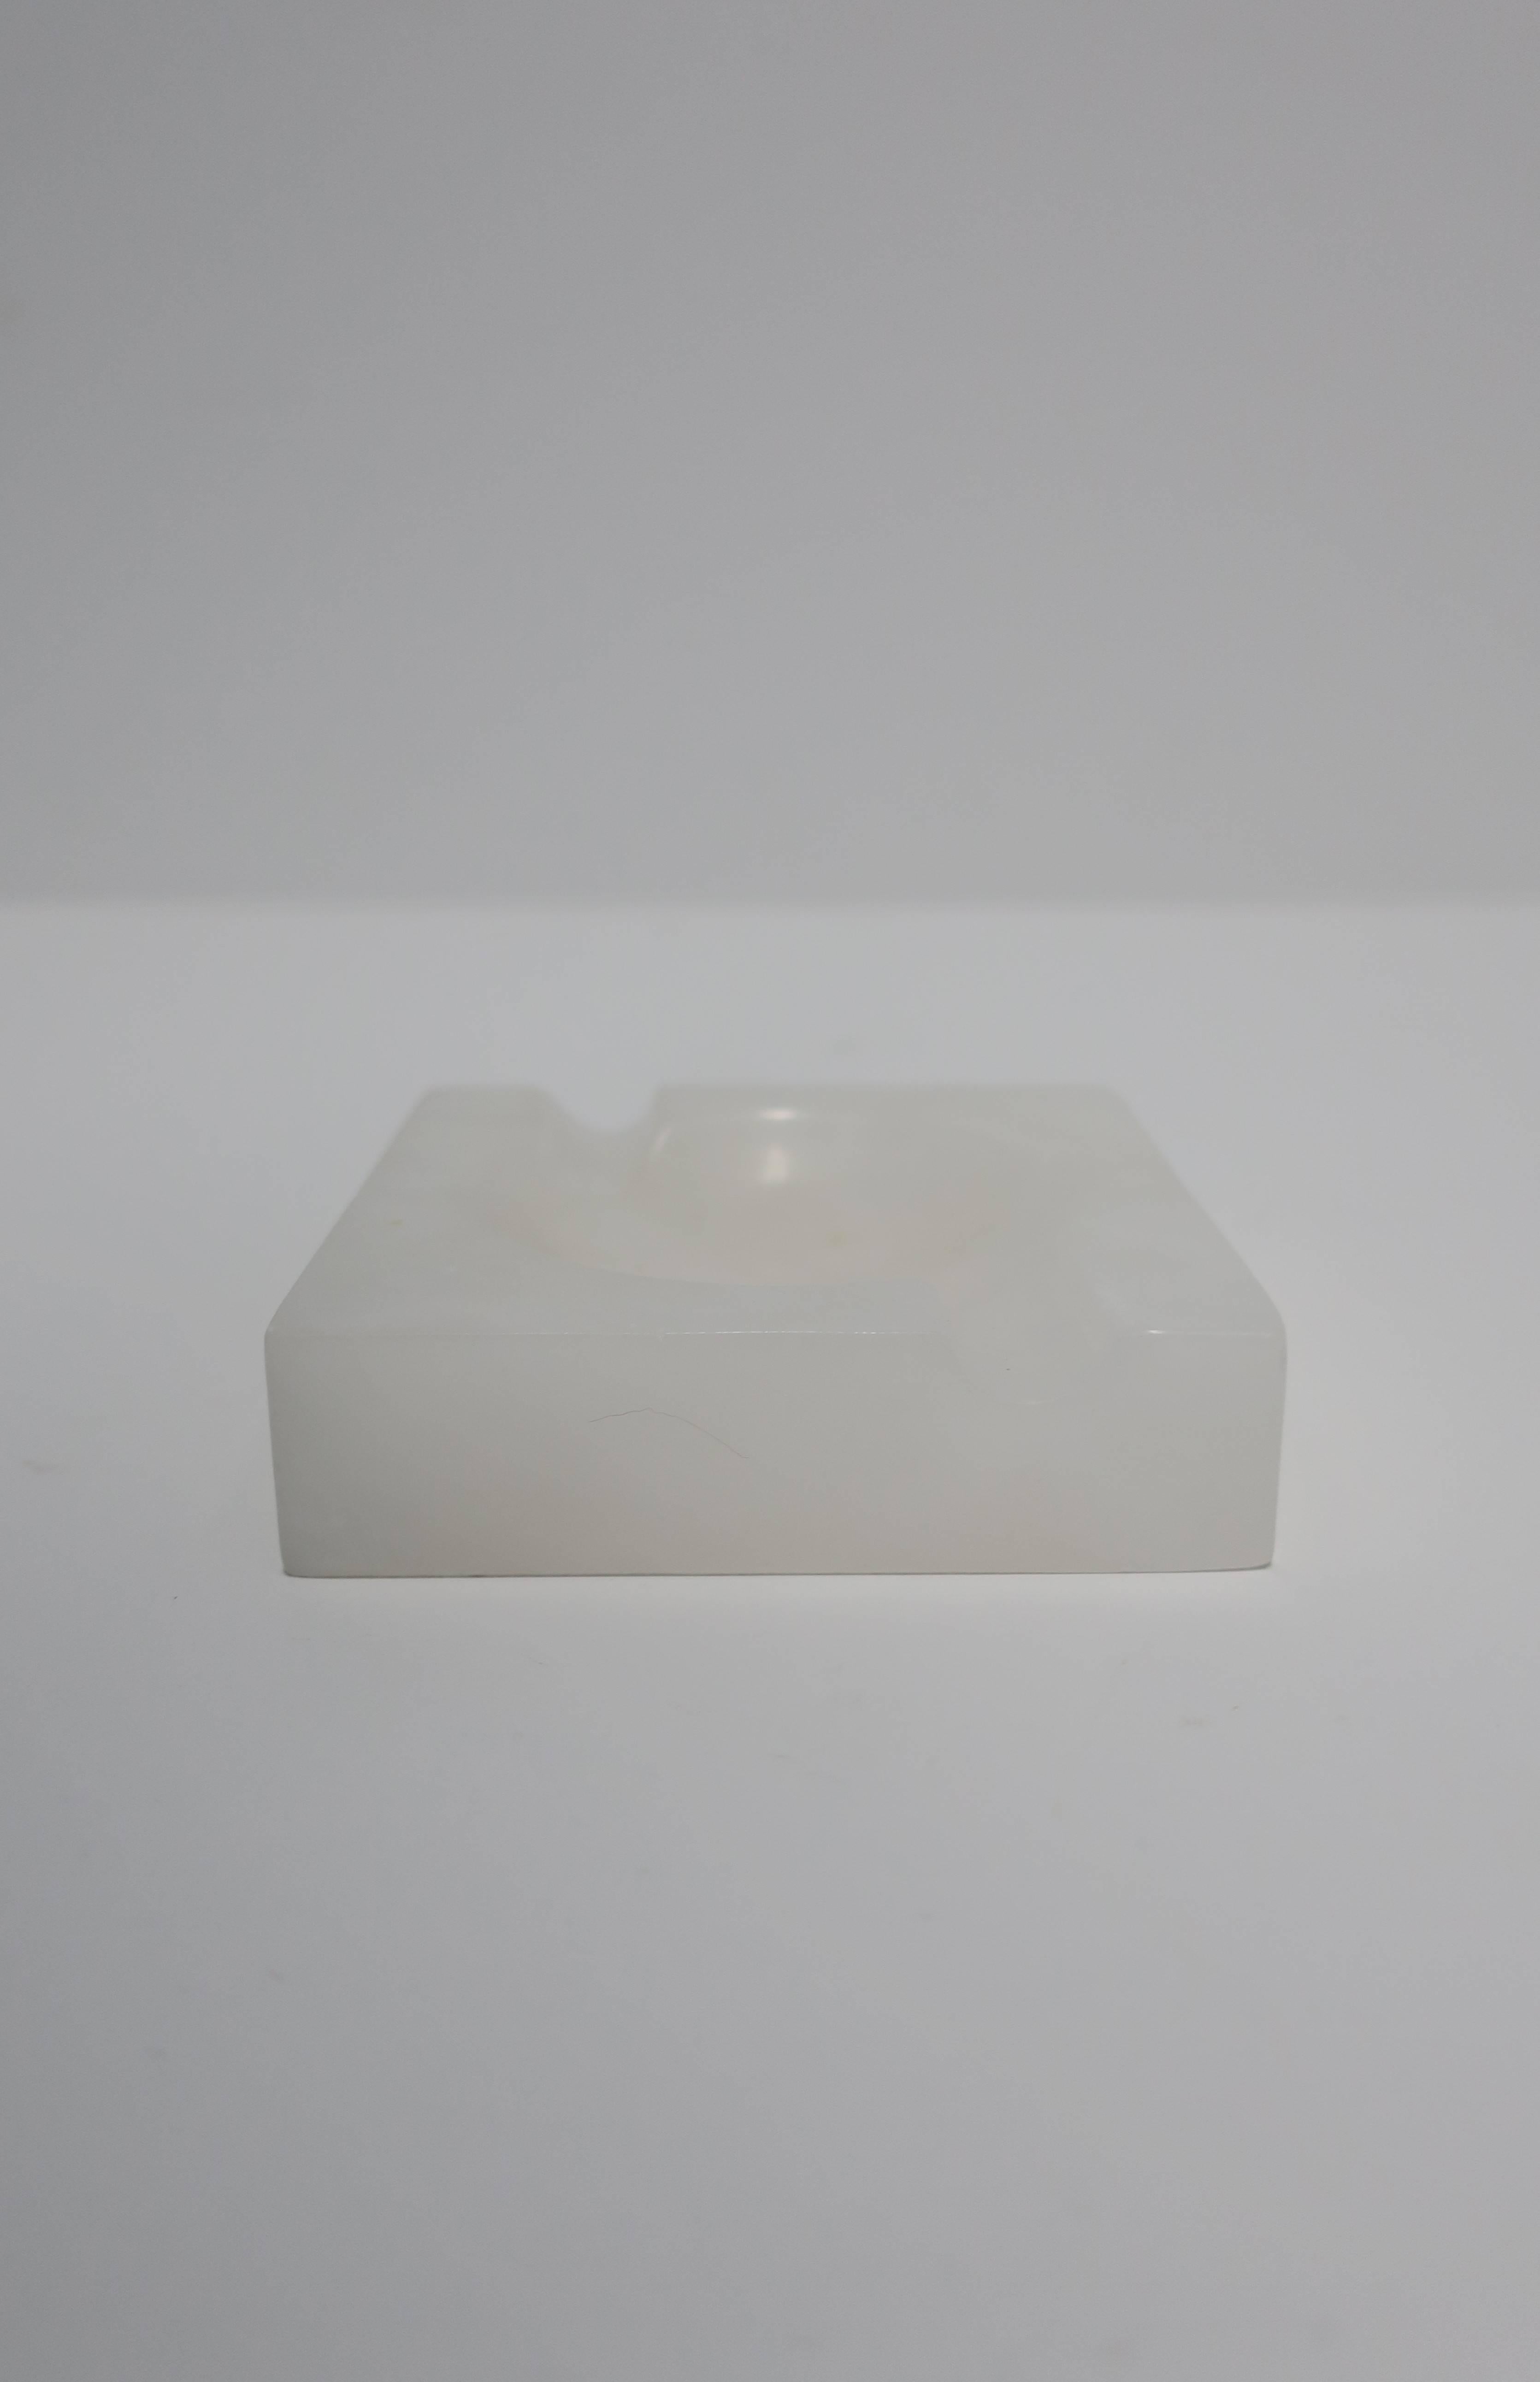 Late 20th Century Italian Modern White Alabaster Marble Ashtray or Vessel